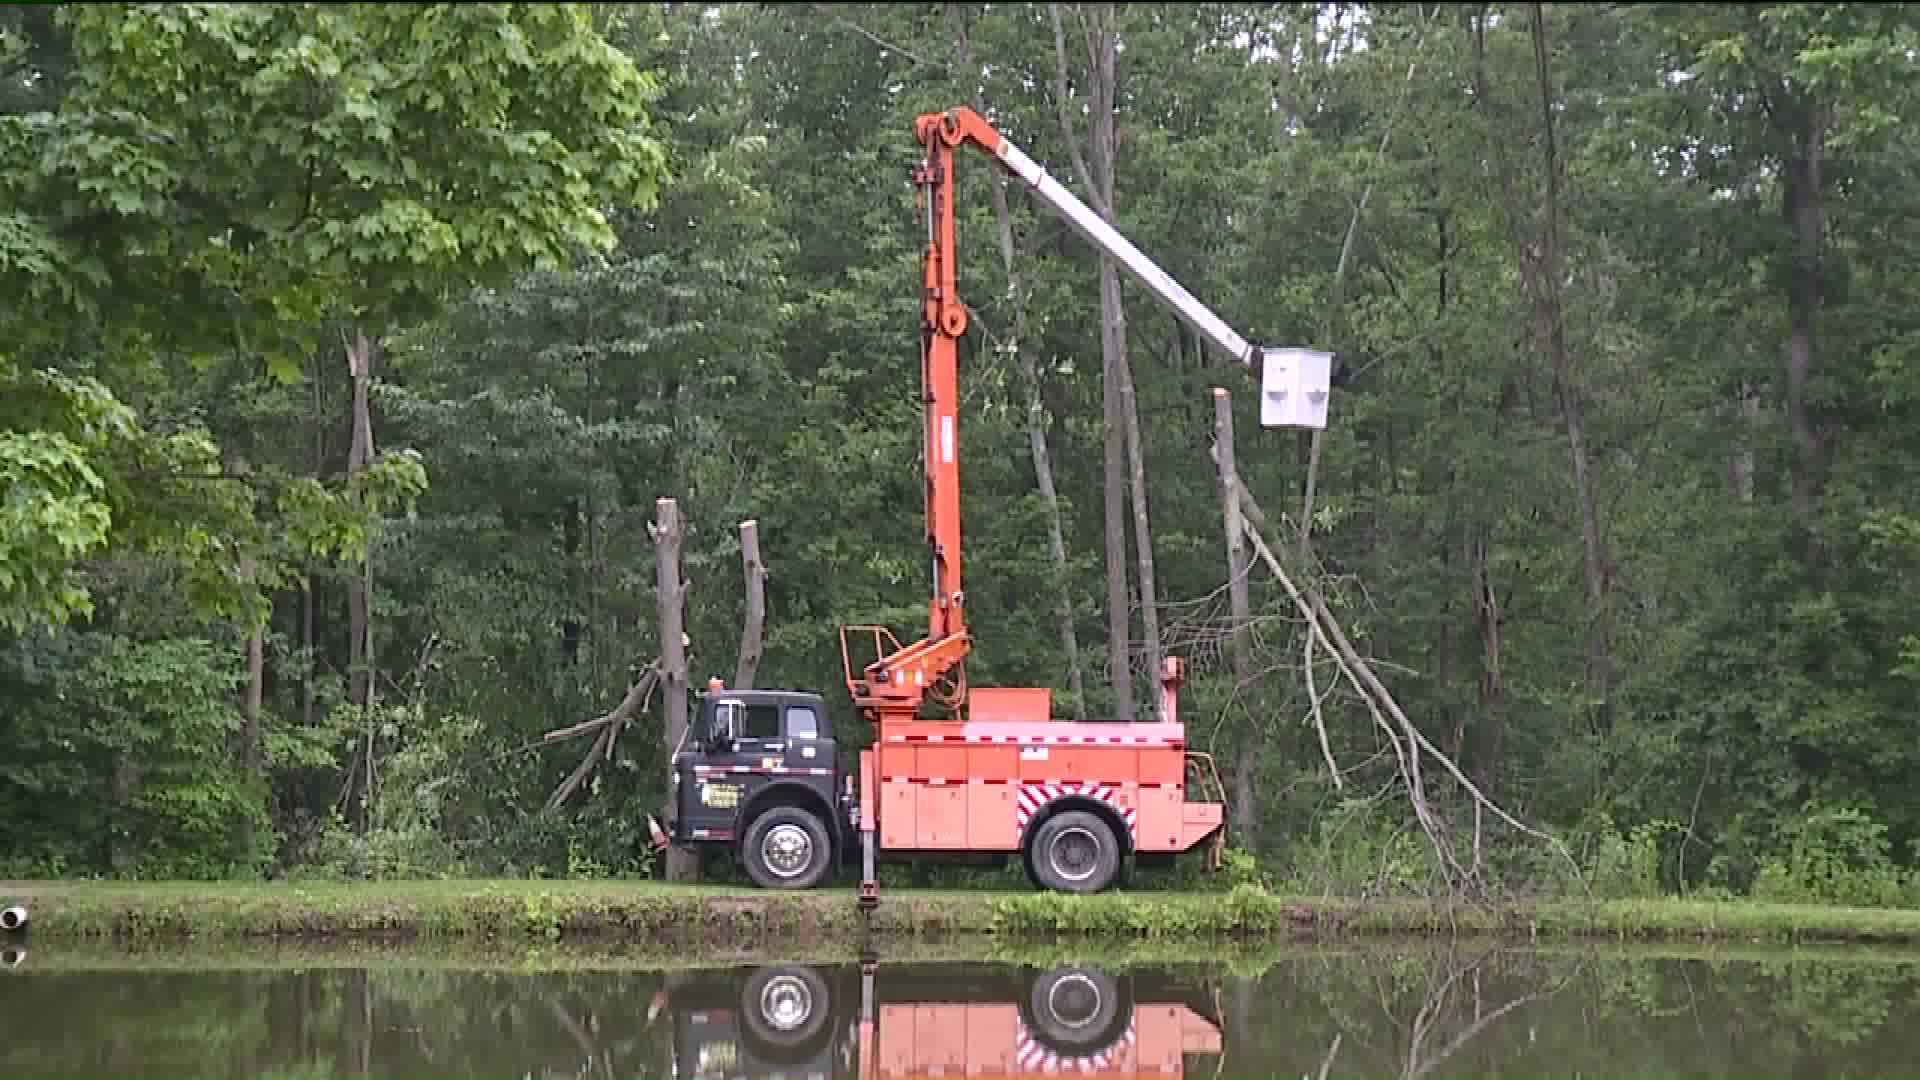 Tree Cutter Injured on the Job in Luzerne County